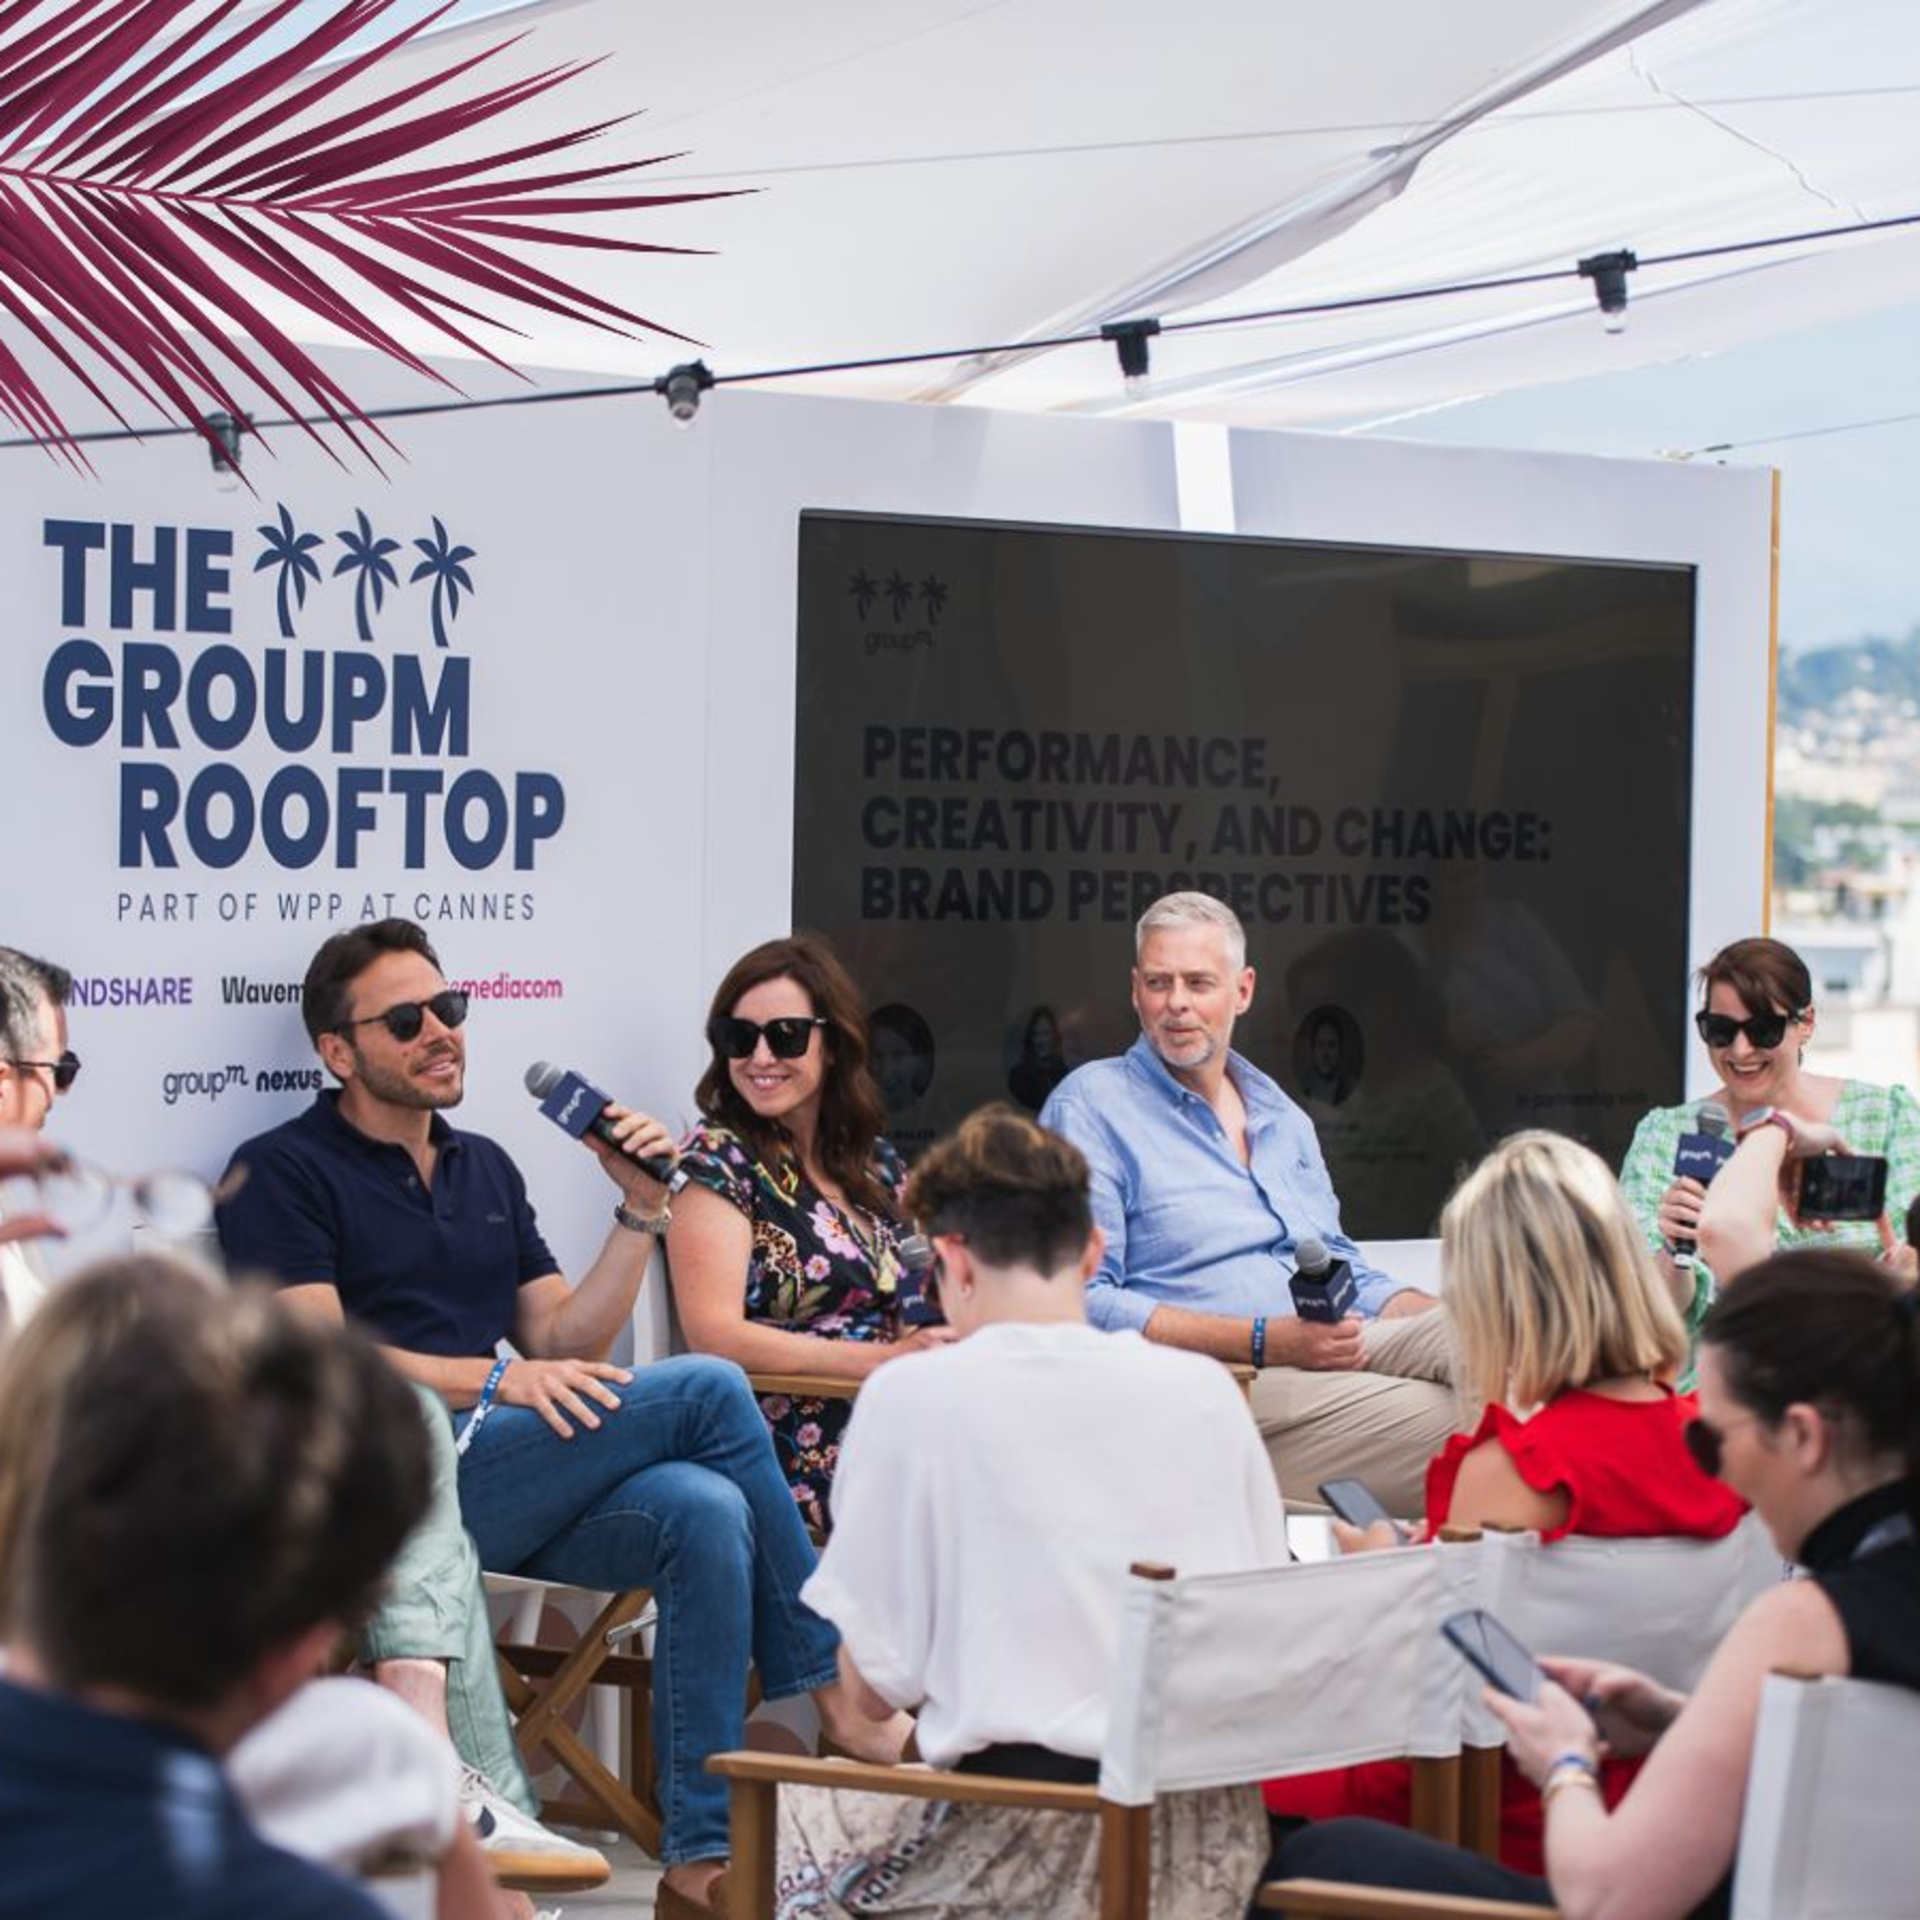 A panel for EssenceMediacom discussing brand performance and creativity at Cannes